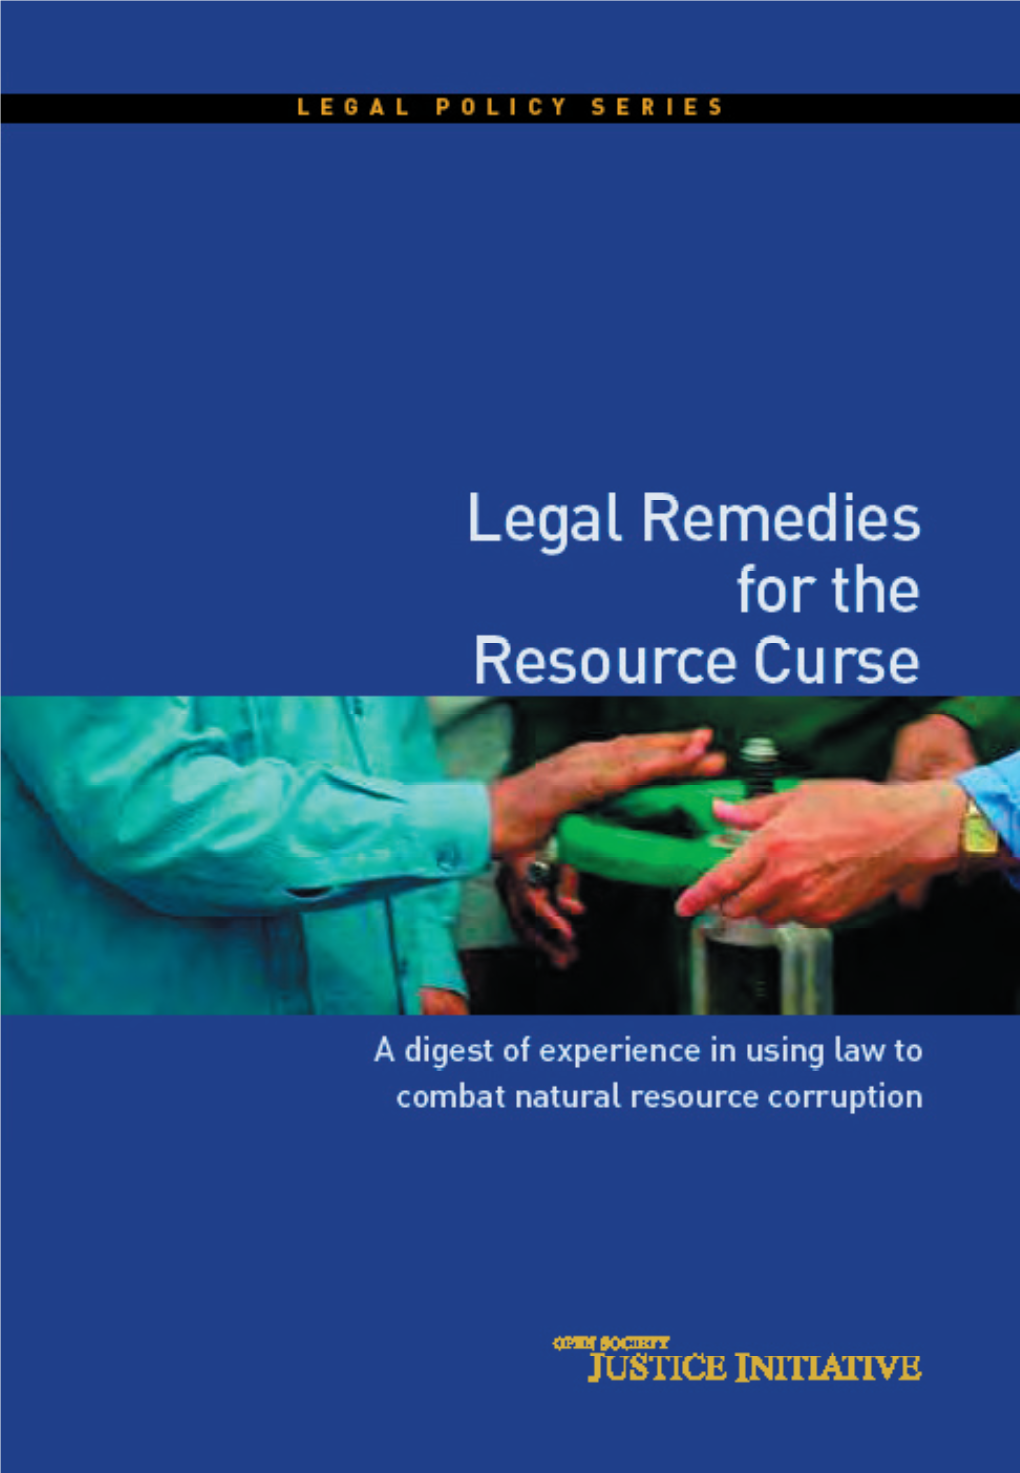 Legal Remedies for the Resource Curse